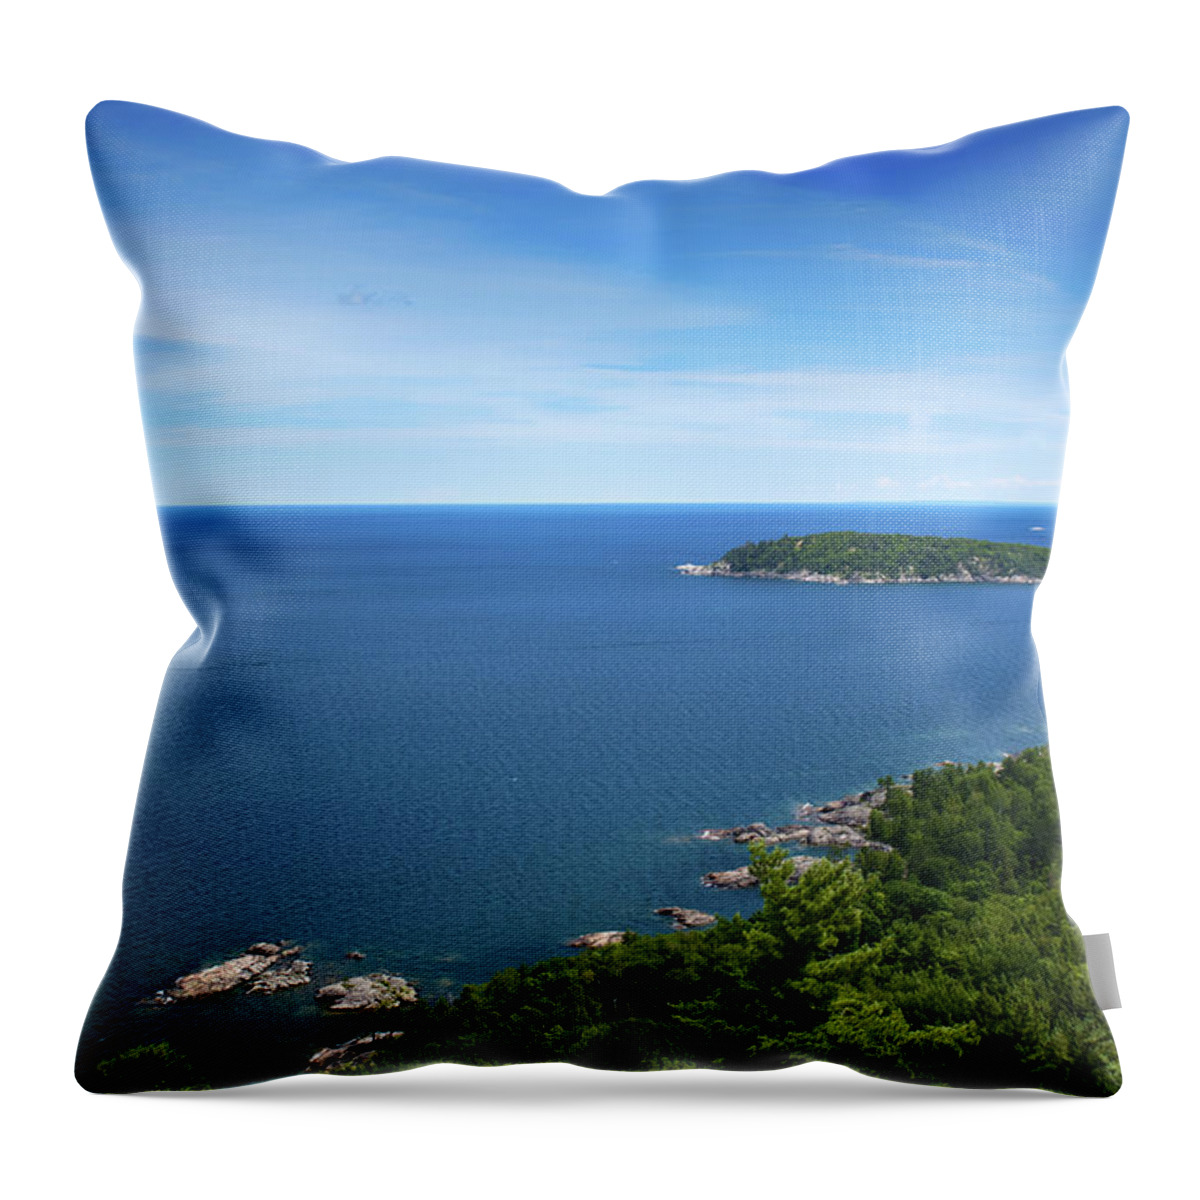  Throw Pillow featuring the photograph A View from Sugarloaf Mountain by Dan Hefle